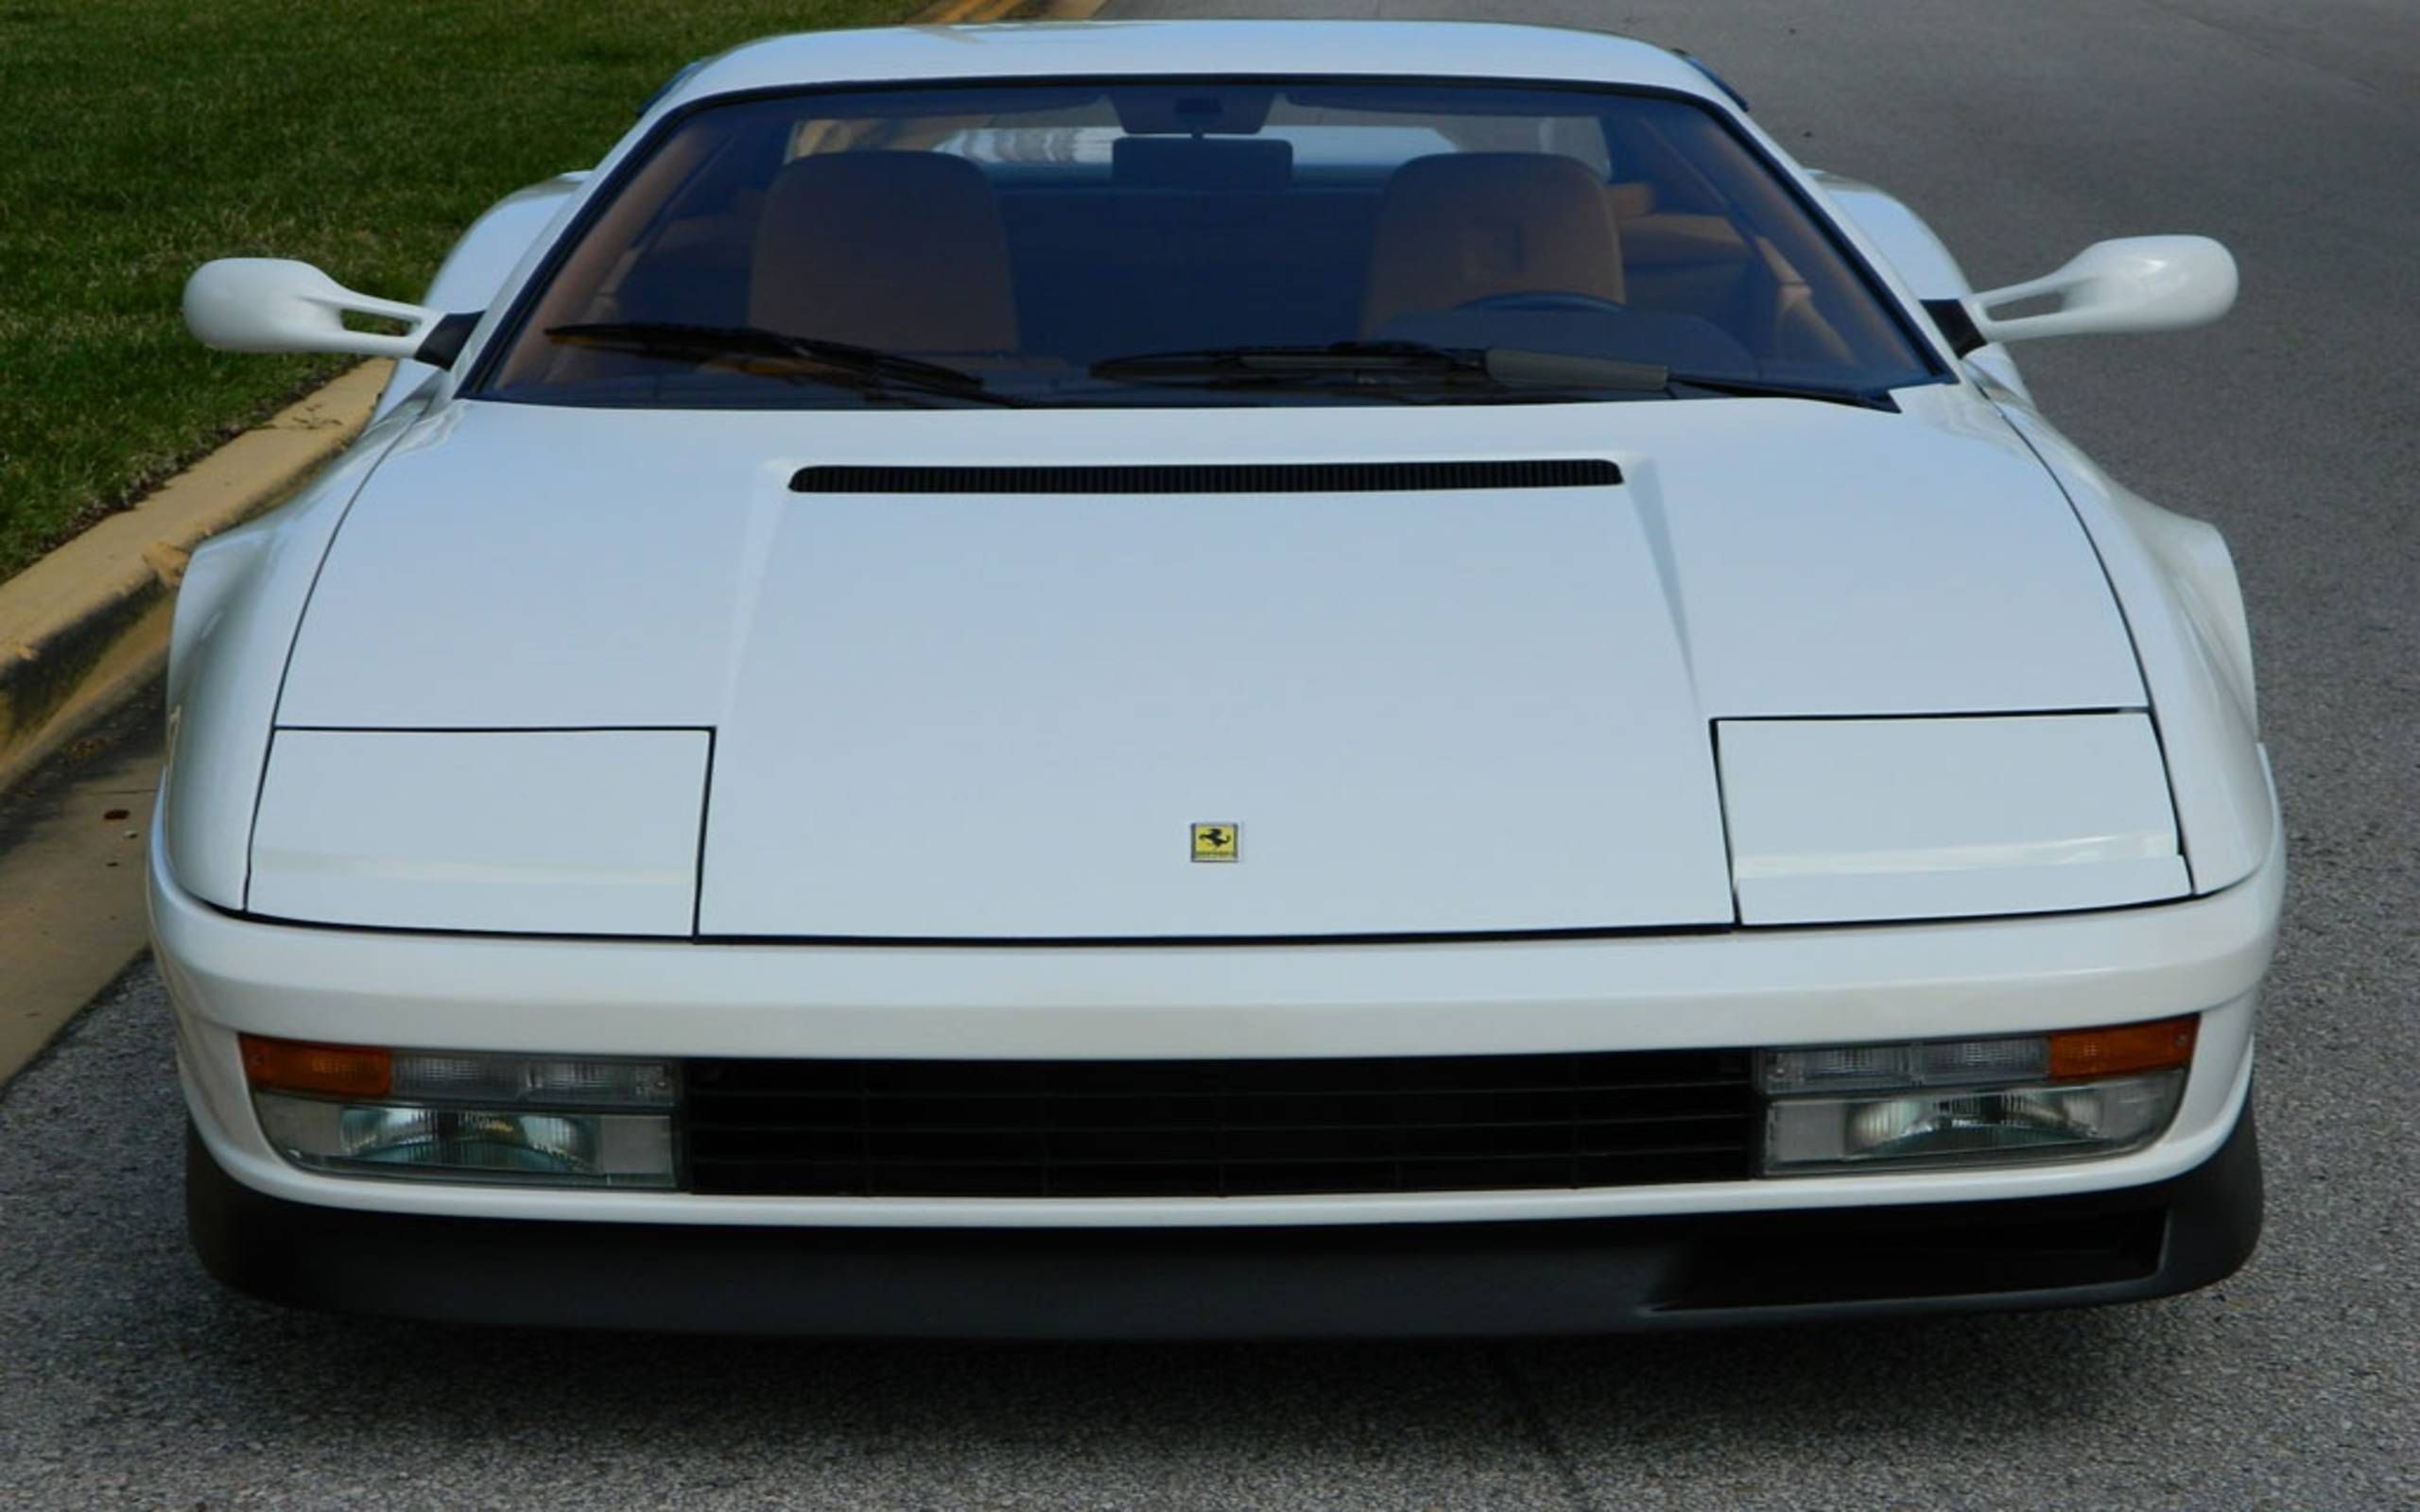 Buy the of Wall Street's' 1991 Testarossa before the economy again